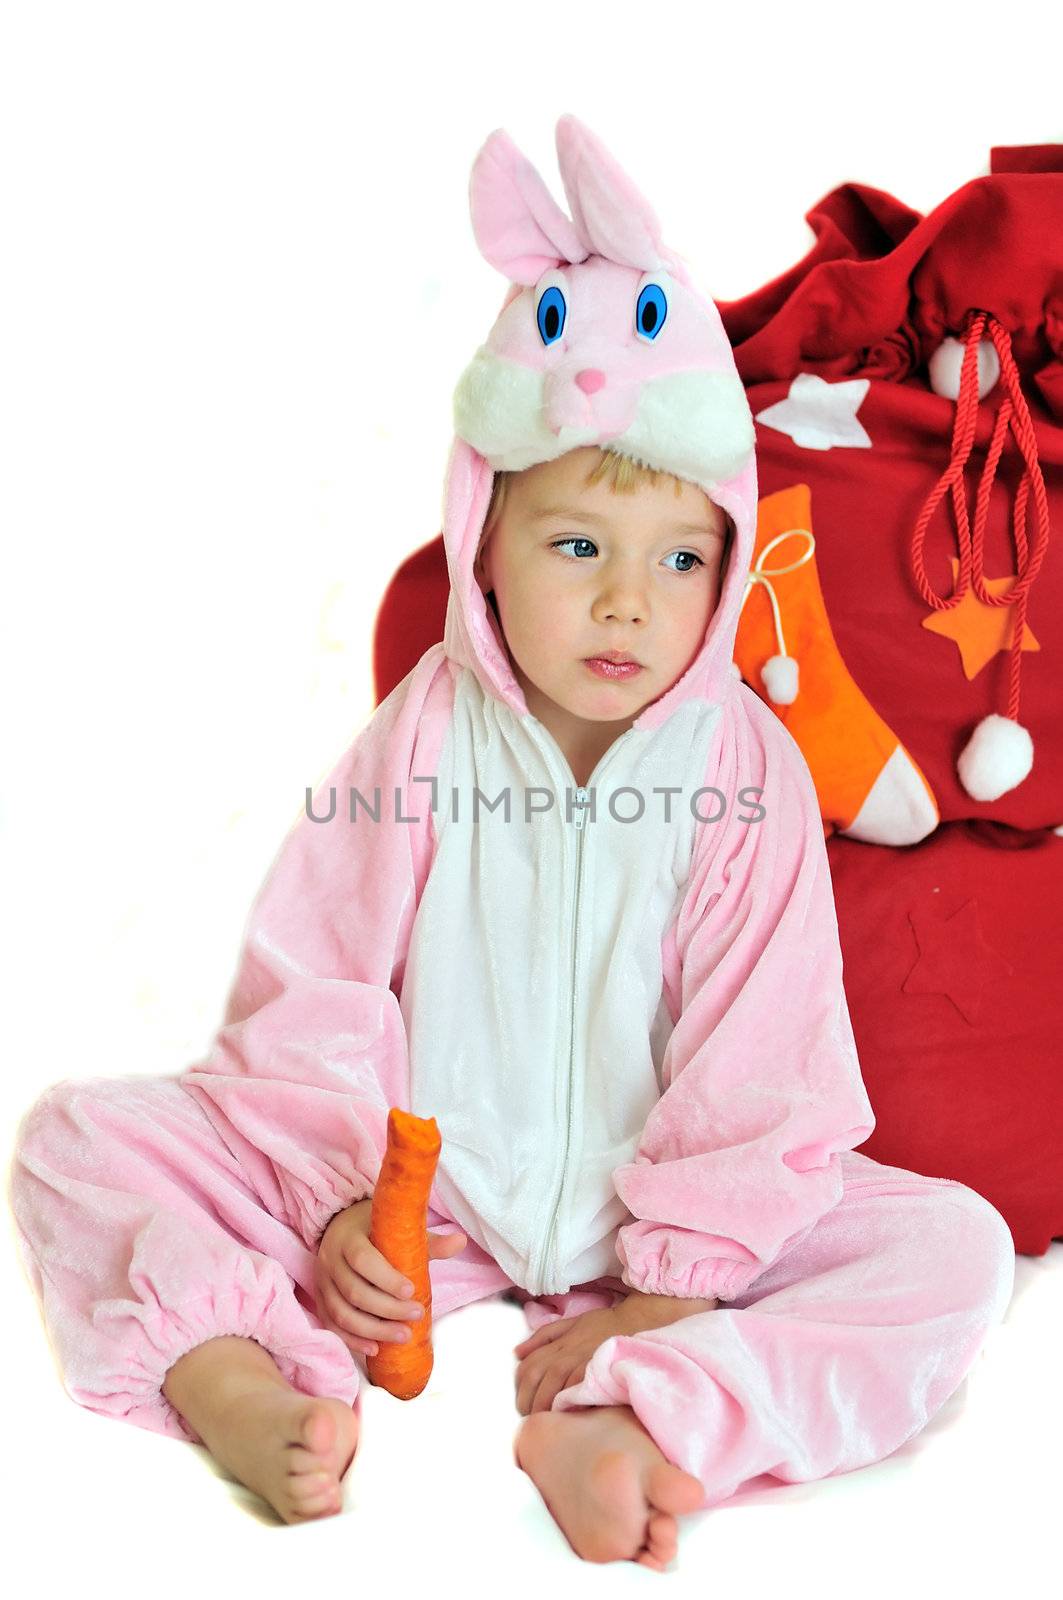  rabbit girl sitting near the bag wit gifts
